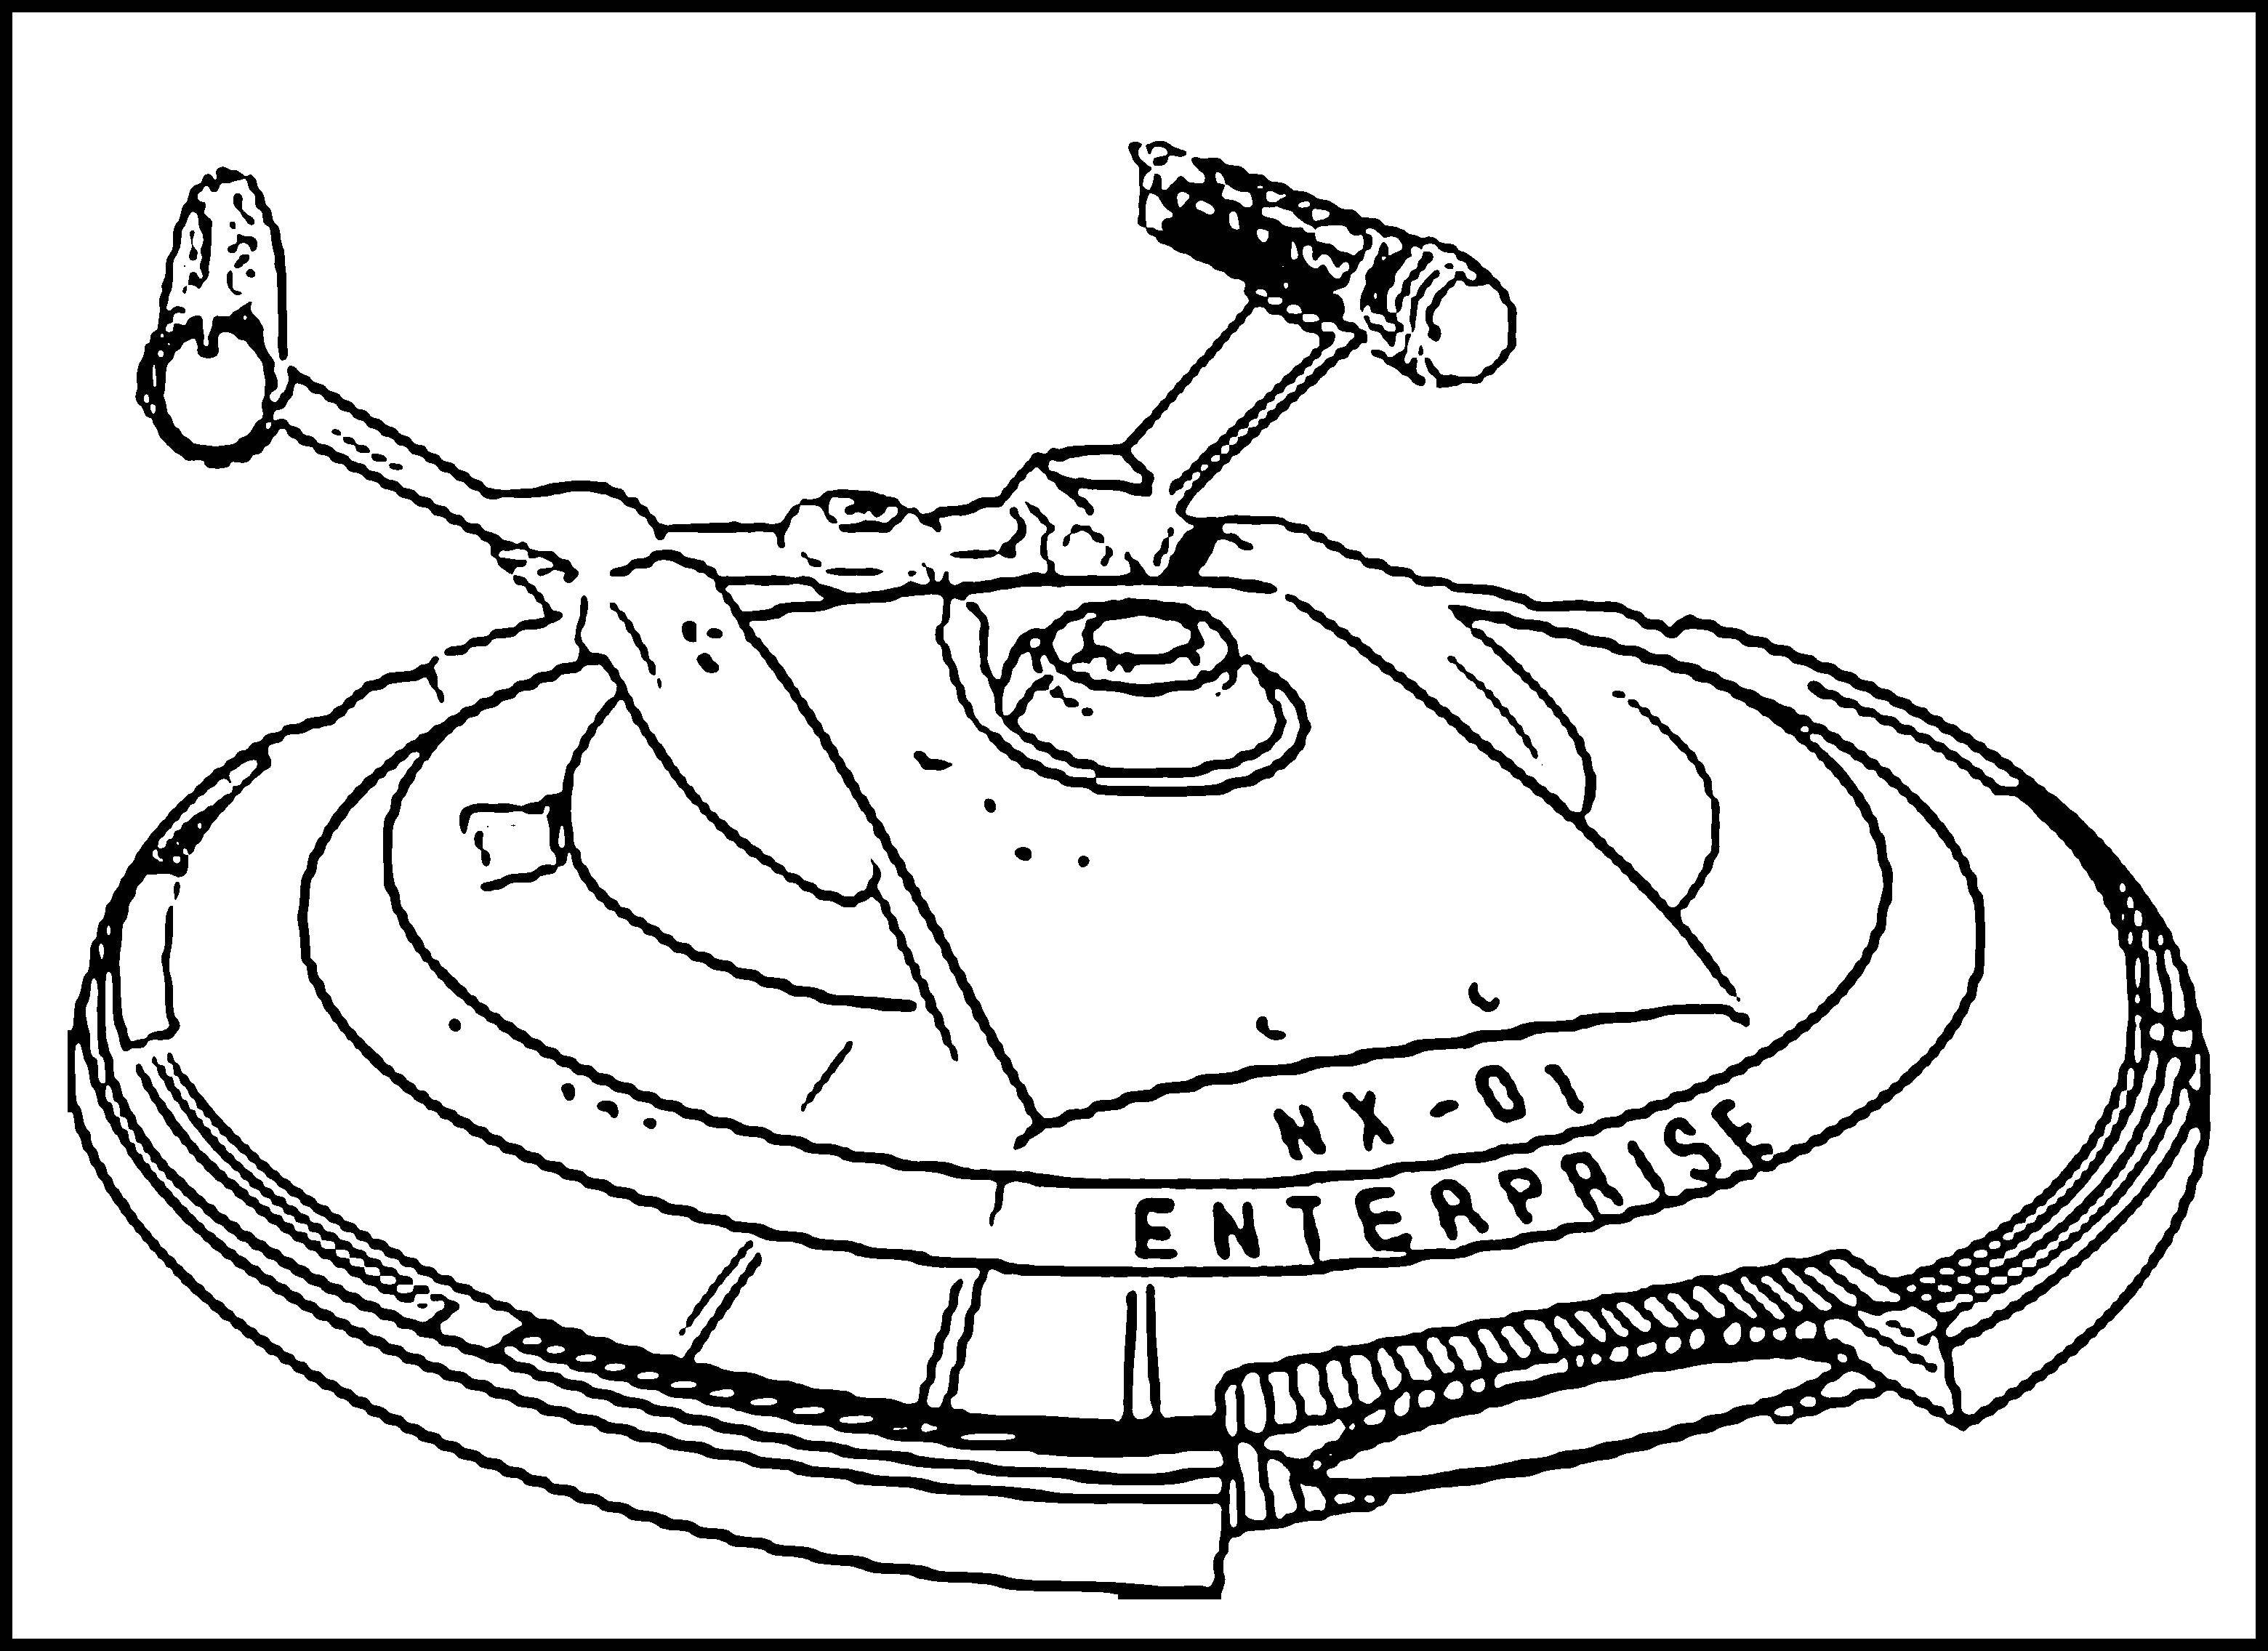 Coloring Spaceship. Category spaceships. Tags:  space, space ship, Shuttle.